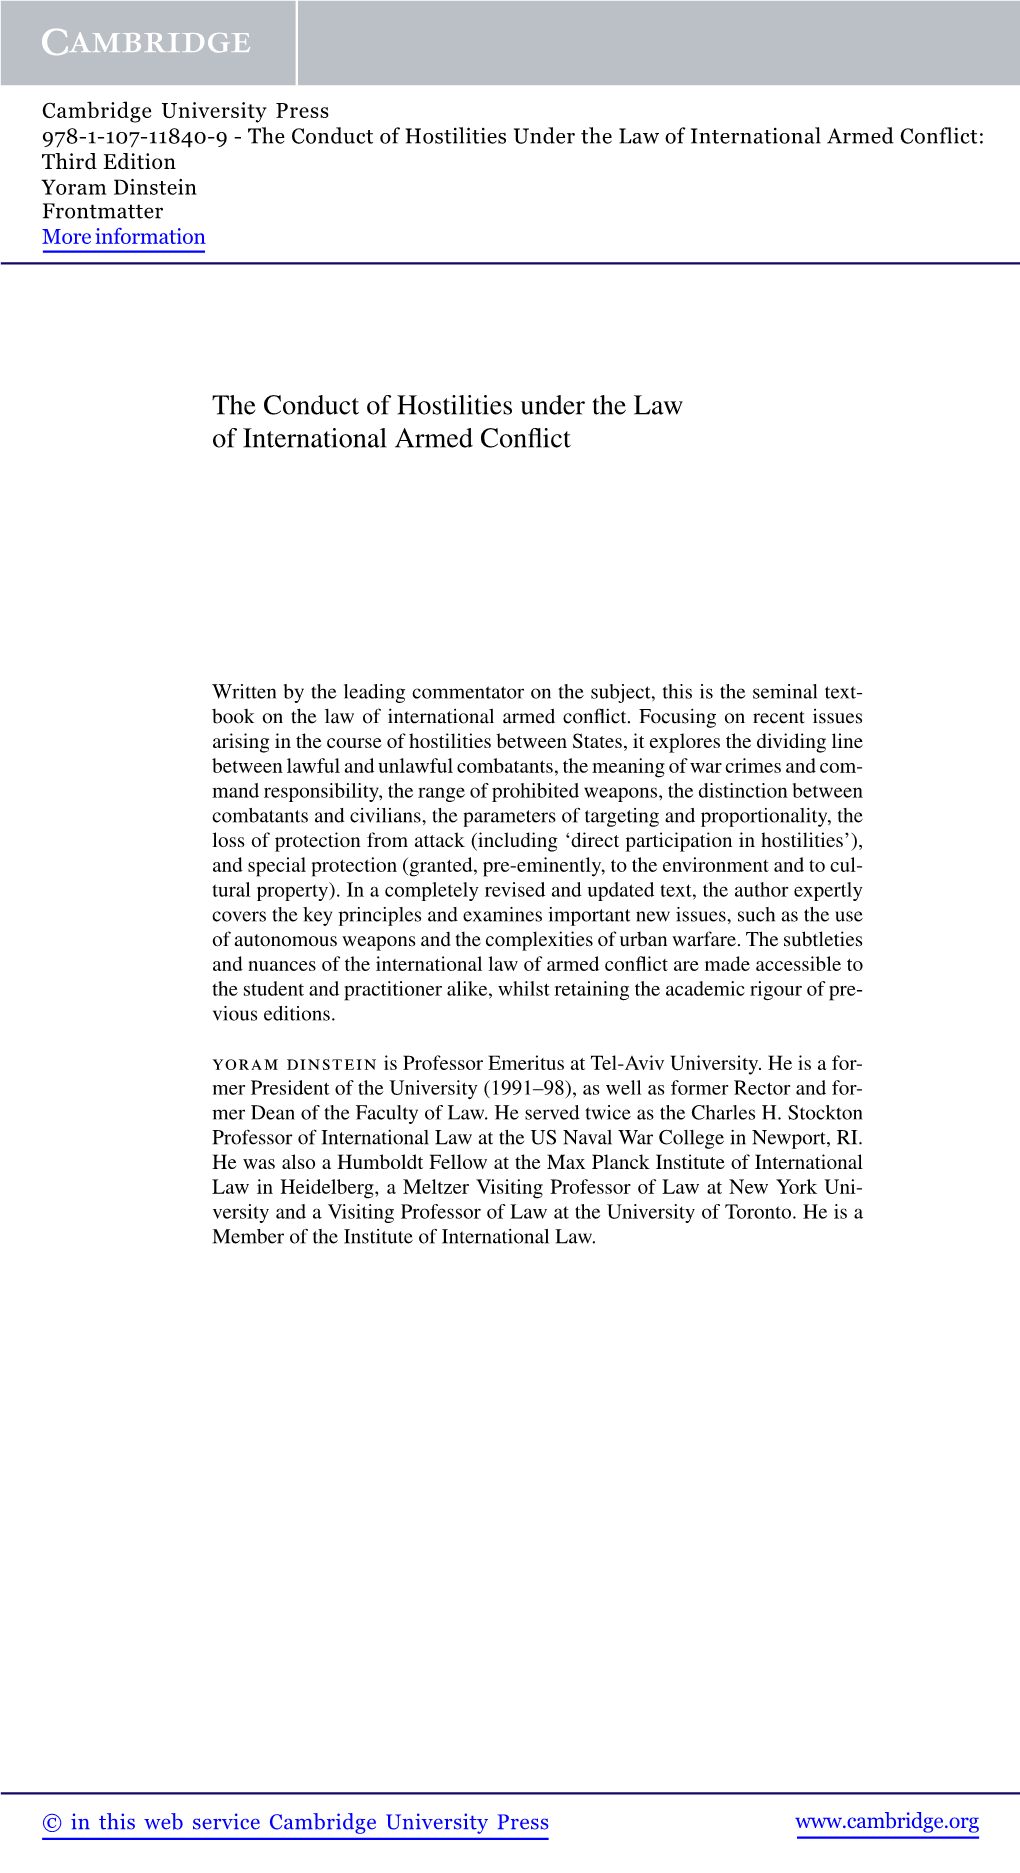 The Conduct of Hostilities Under the Law of International Armed Conflict: Third Edition Yoram Dinstein Frontmatter More Information